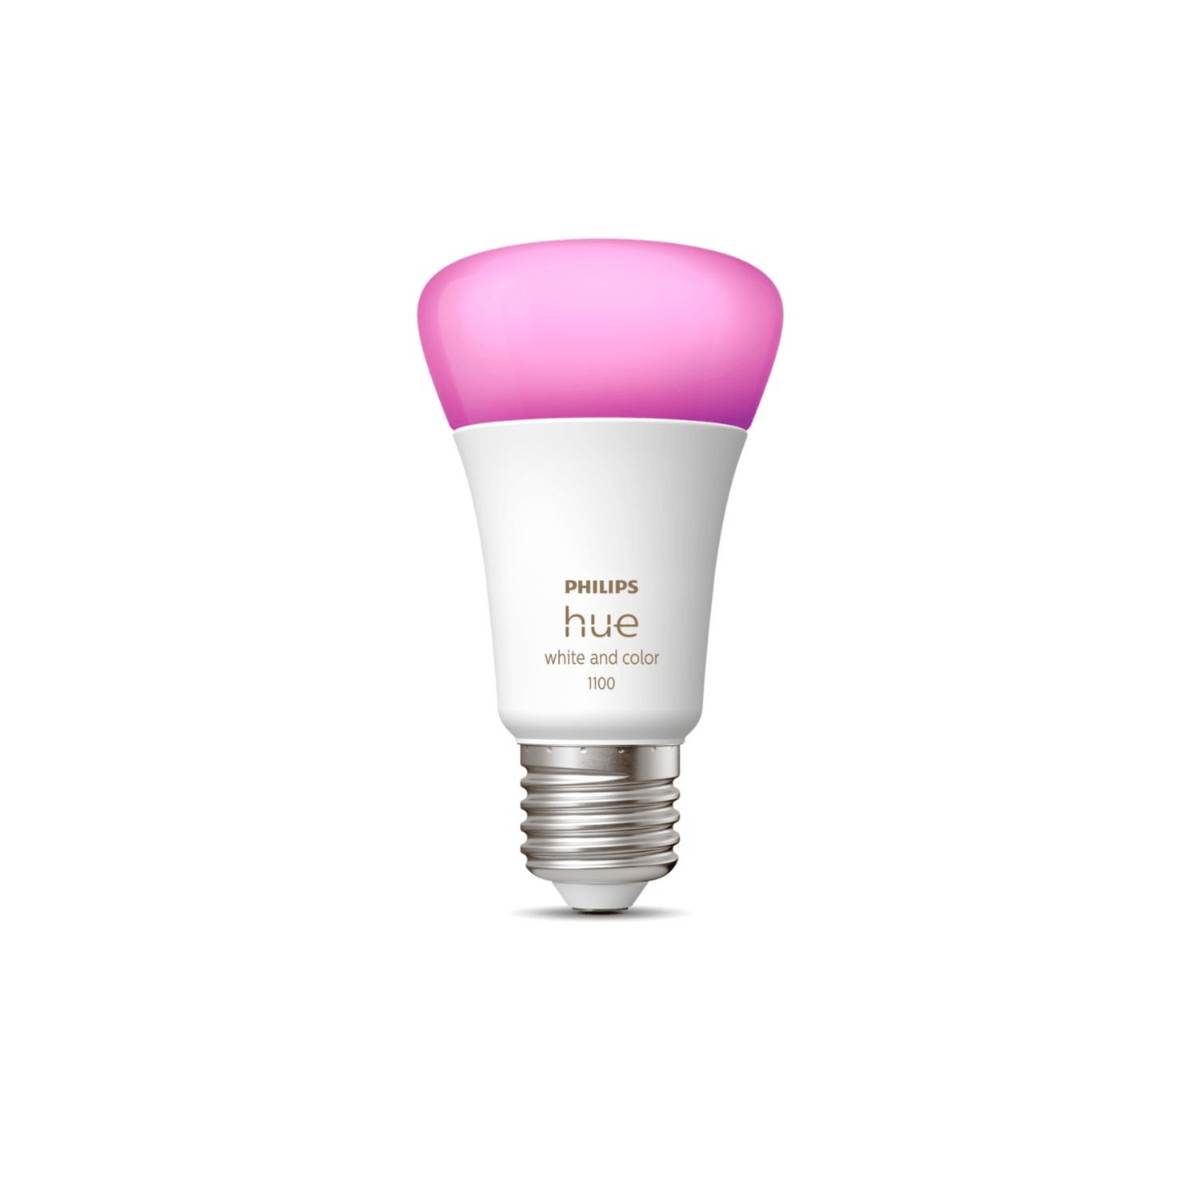 Philips Hue White and Color Ambiance LED Lampe RGBW E27 A60 800lm dimmbar  via App oder per Sprache | E27 | Leuchtmittel | Licht | your-smarthome |  Dein Smart Home Onlineshop